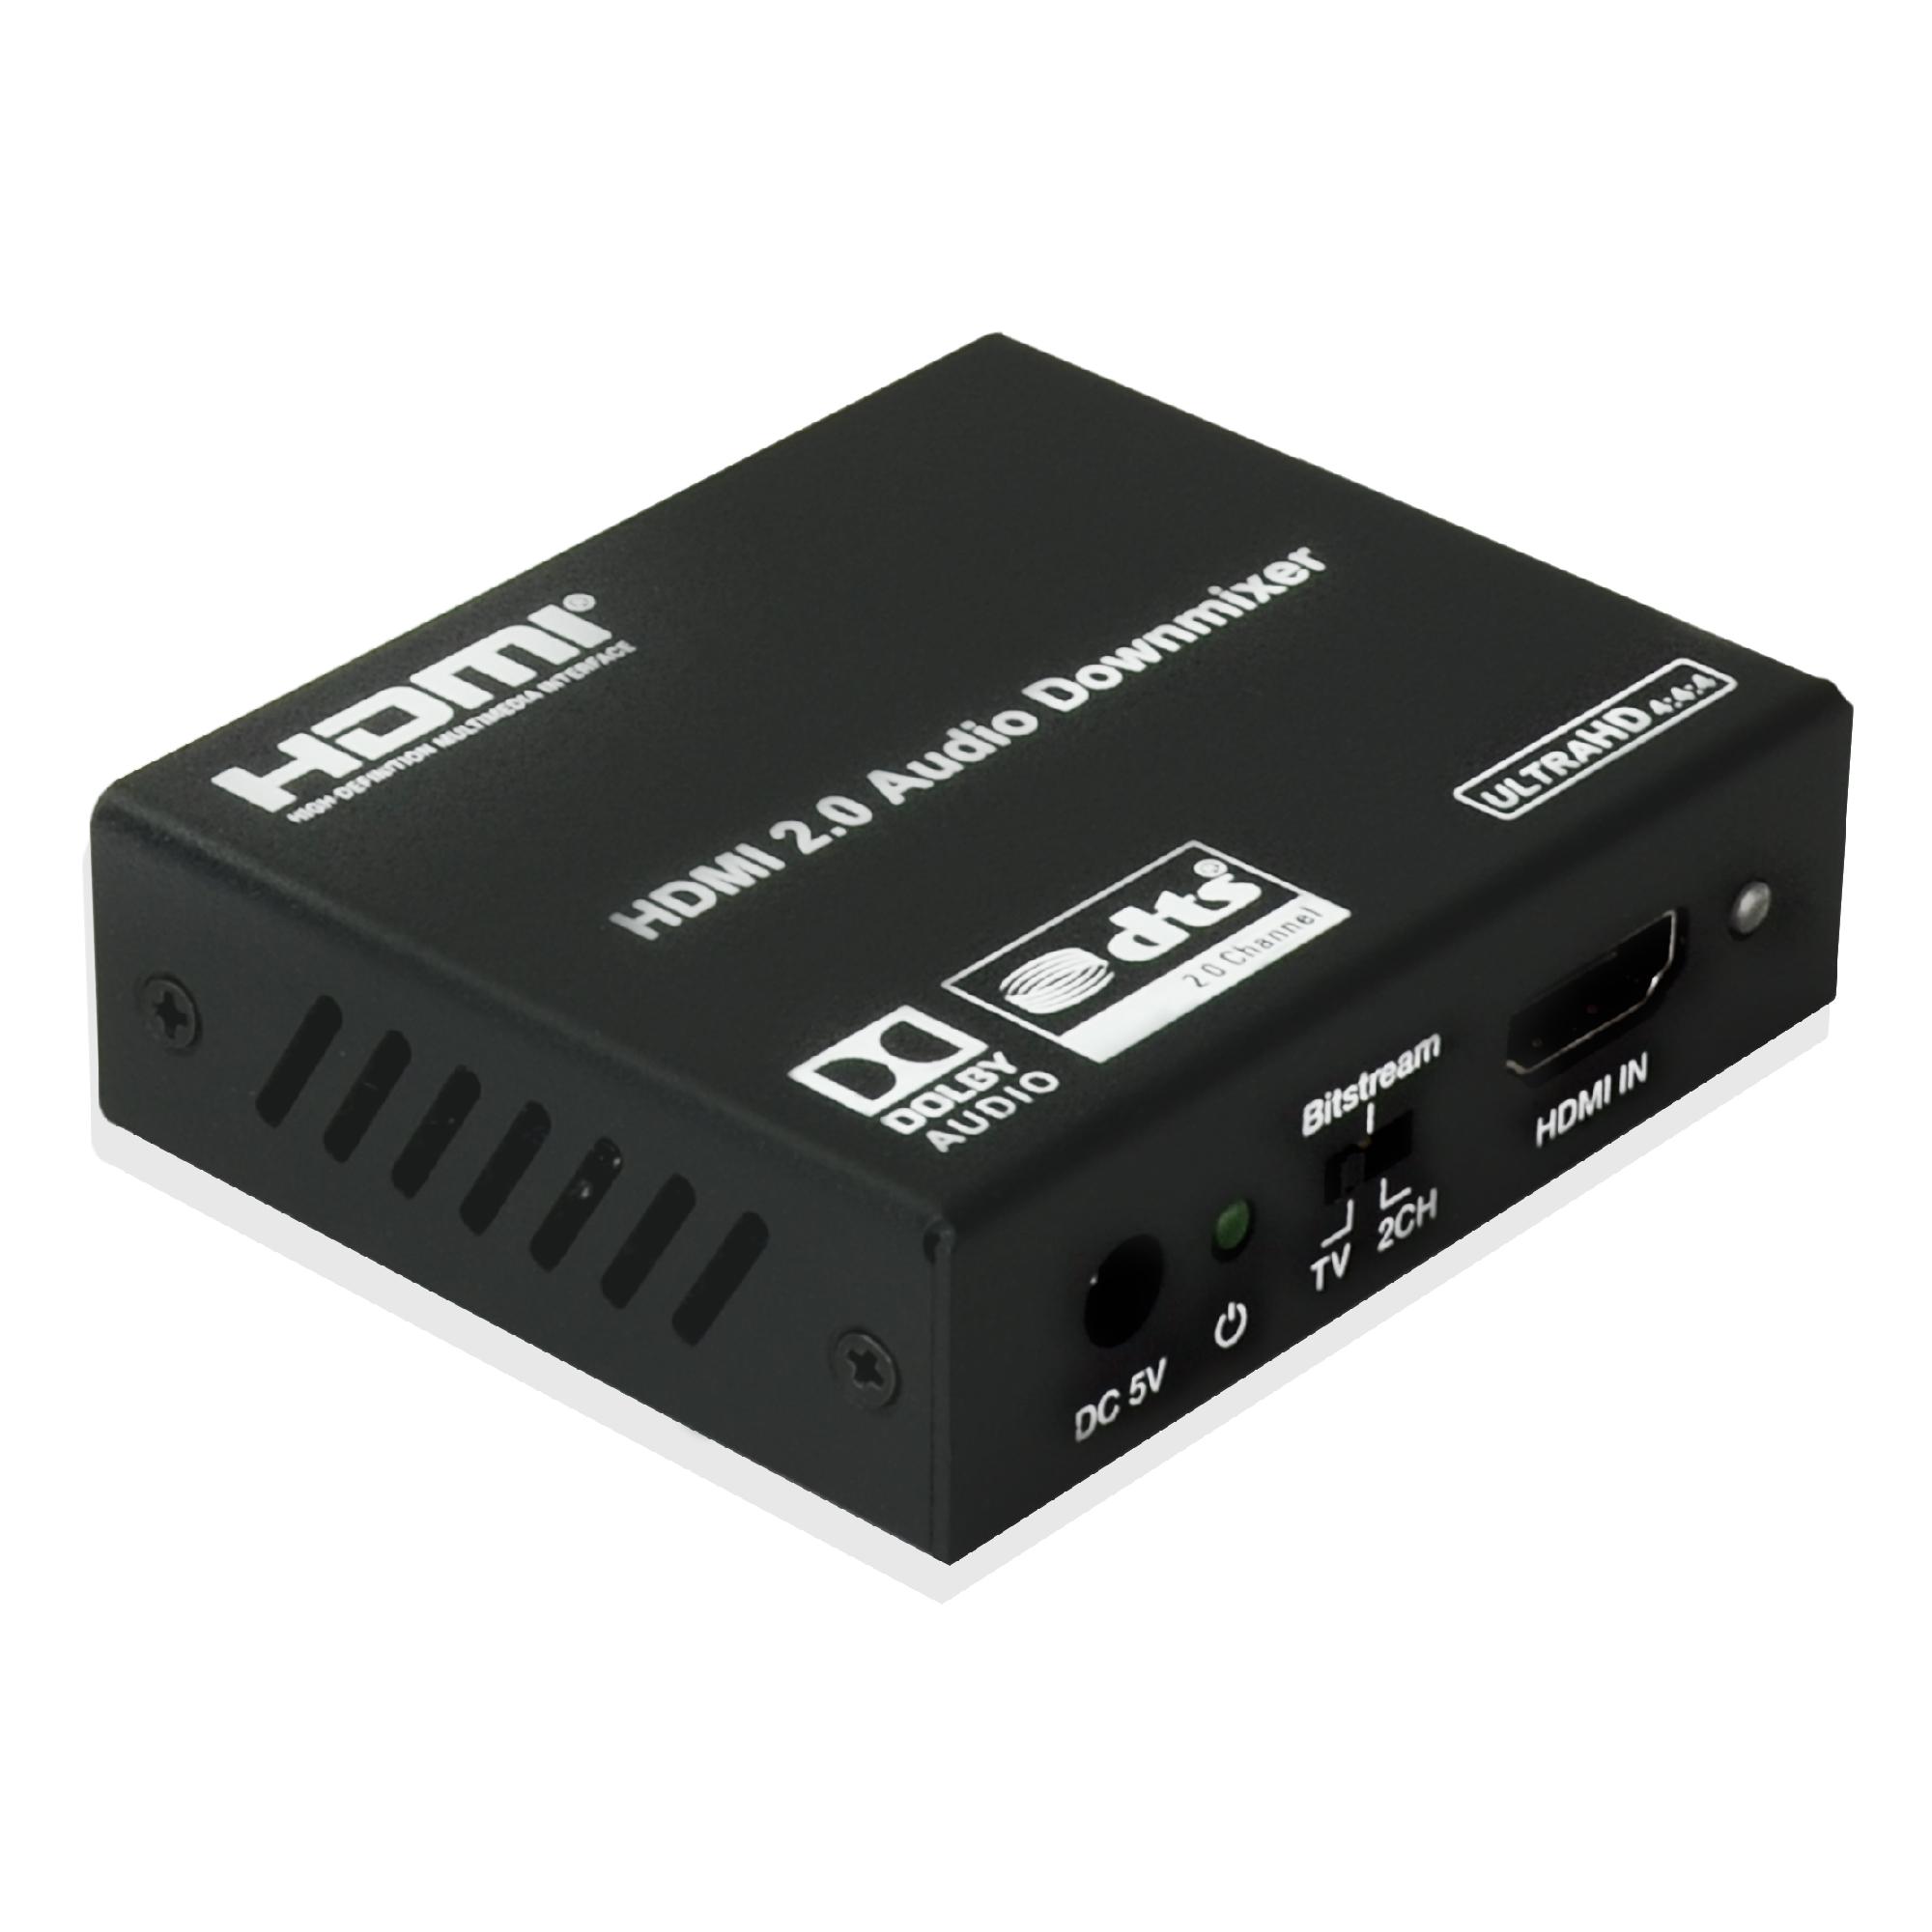 HDMI 2.0 Audio Extractor Converter with Downmix [JTECH-EXD2] - J-Tech